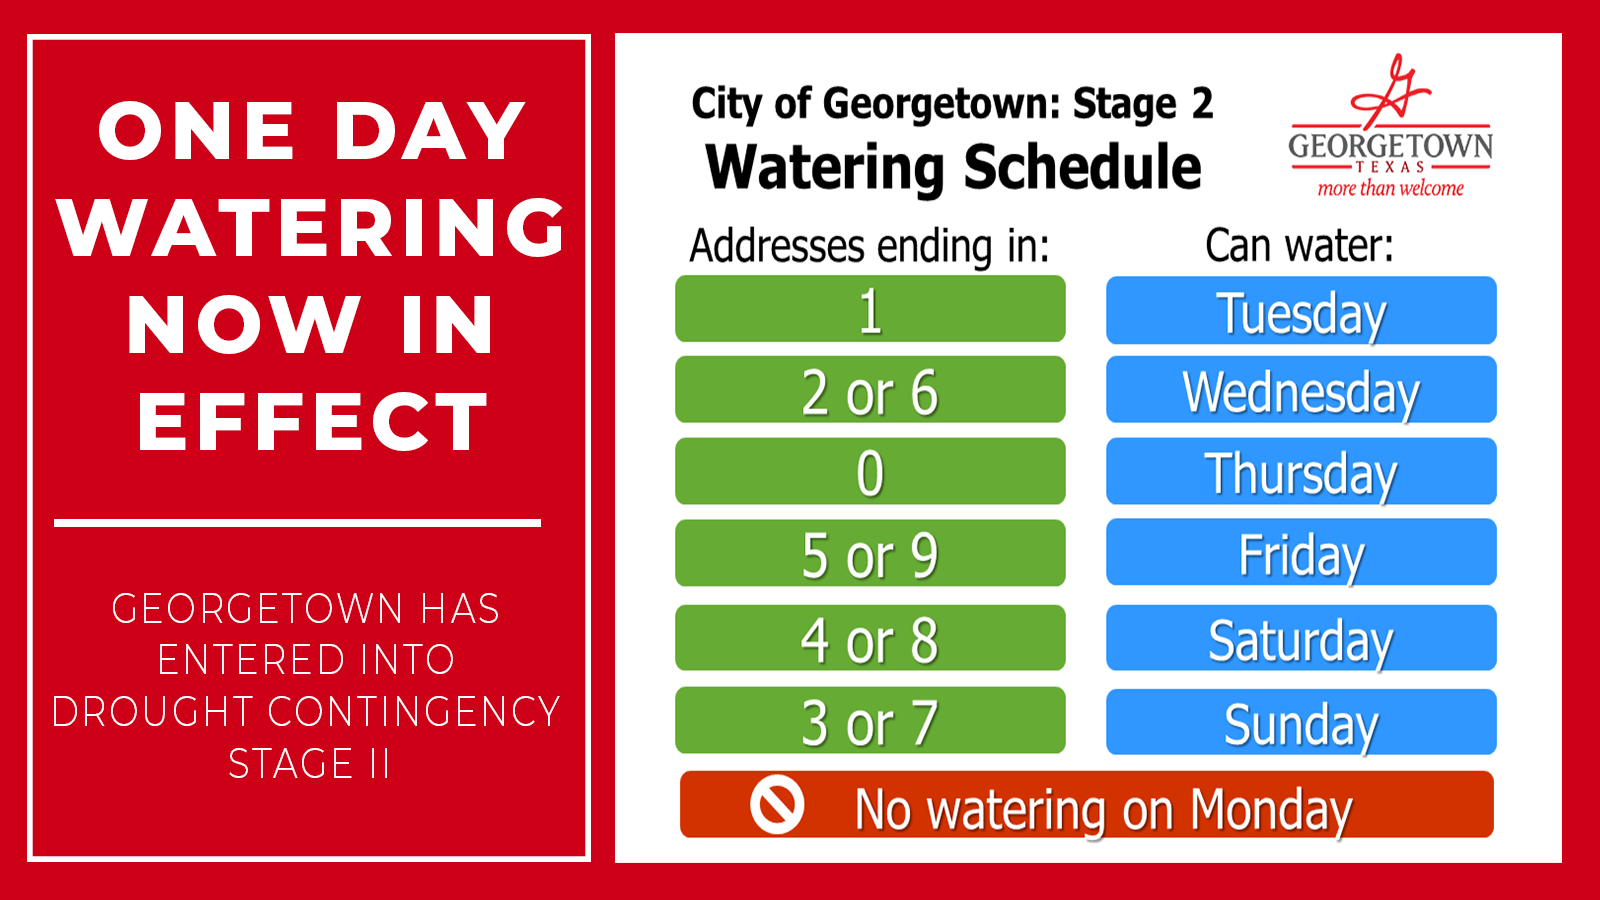 attention-all-georgetowntx-water-customers-one-day-watering-is-now